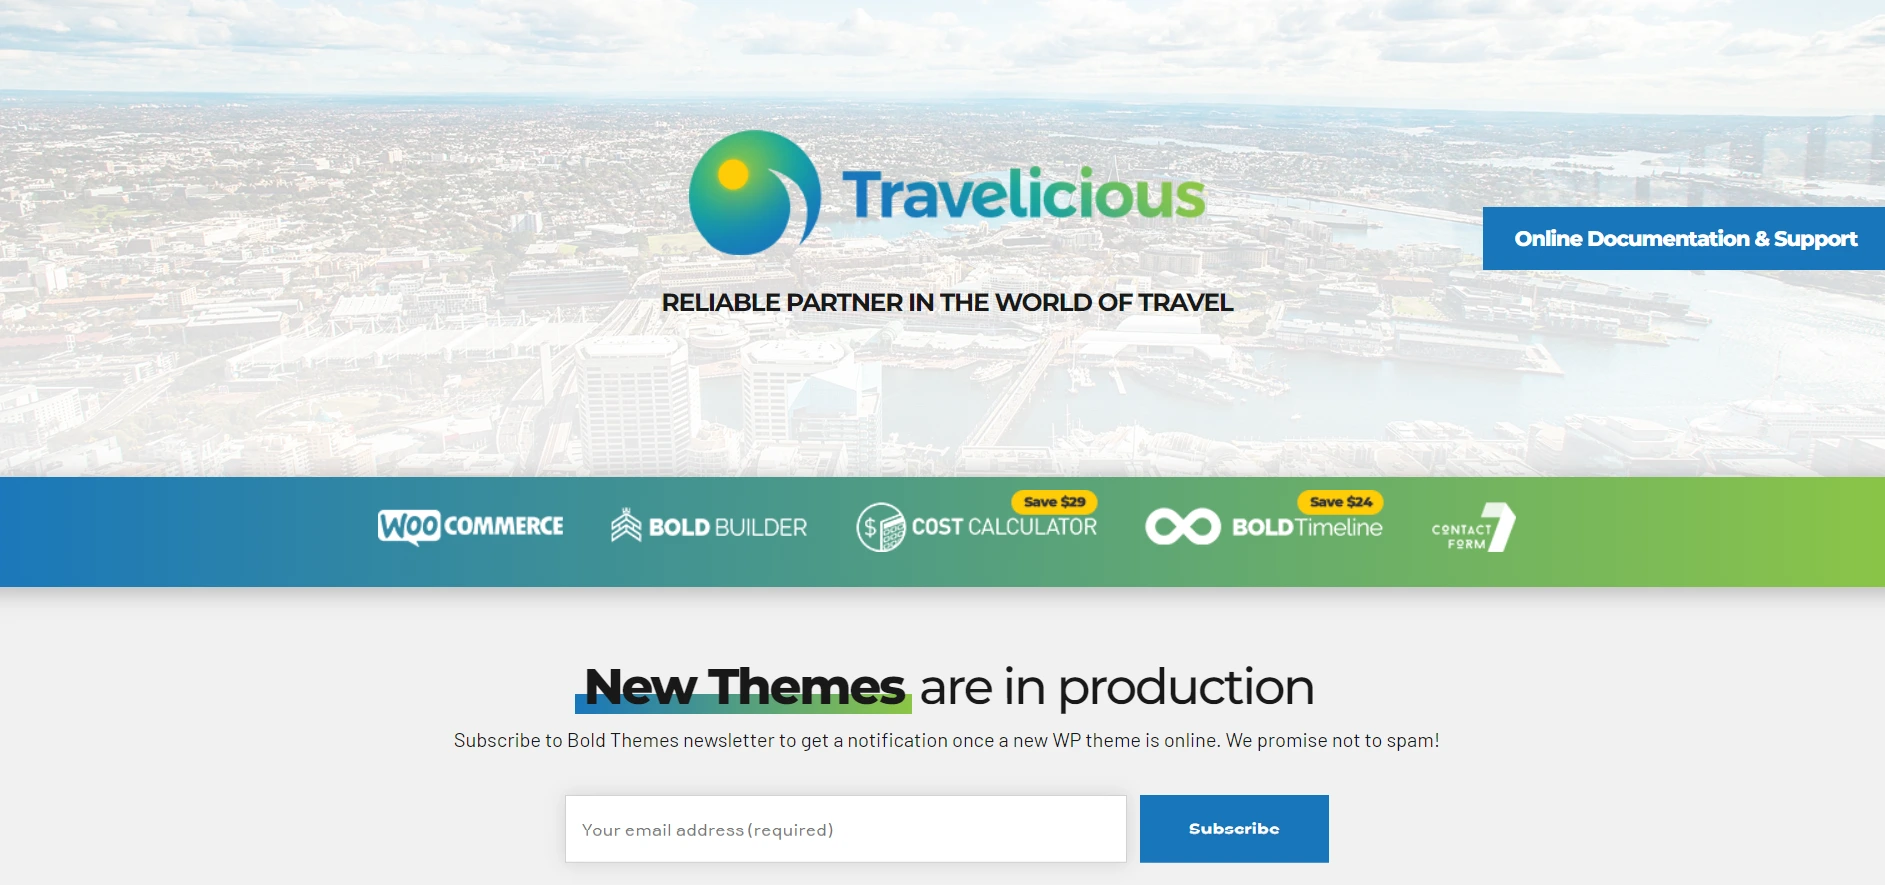 Travelicious Travel Agency Themes